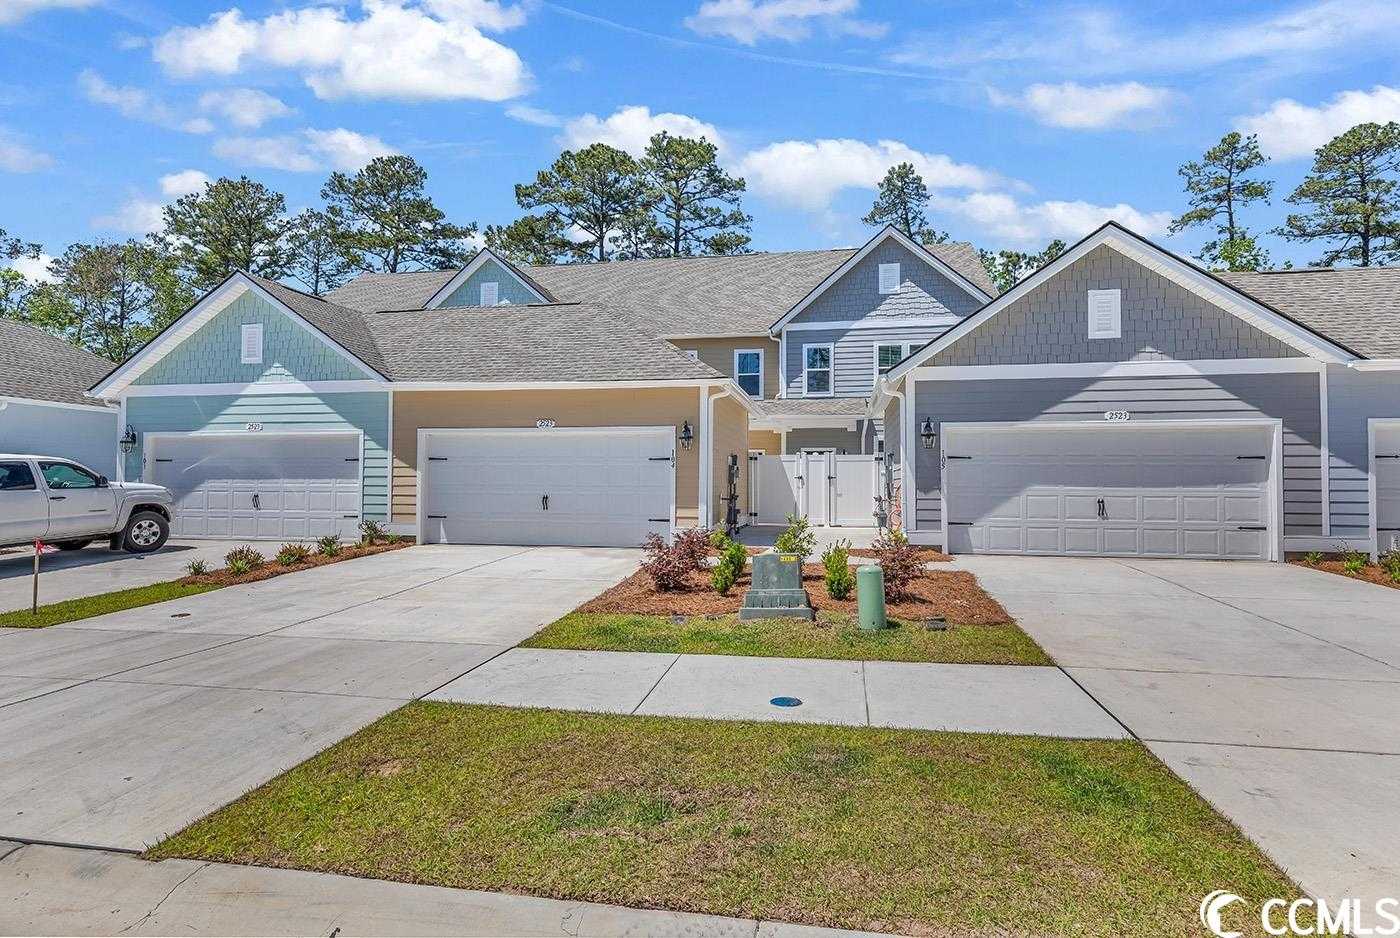 View Myrtle Beach, SC 29577 townhome